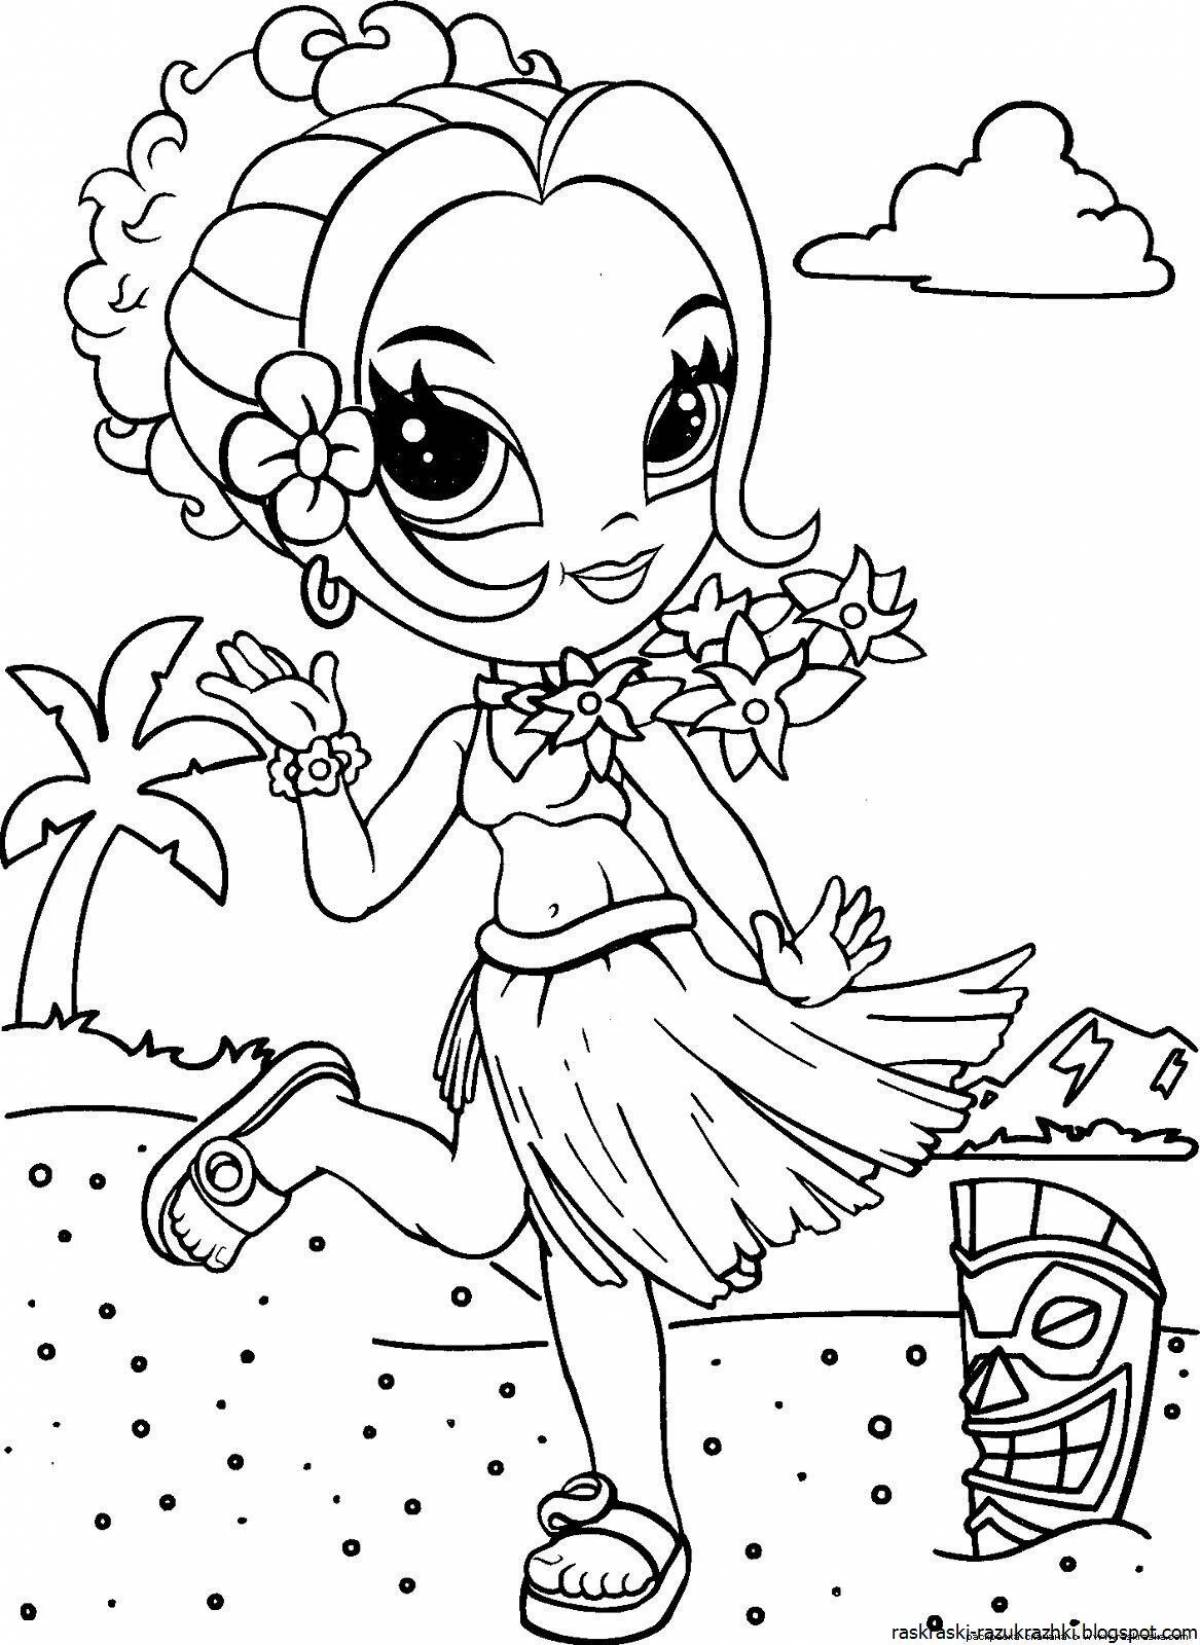 Color-storm coloring book for 6 year old girls